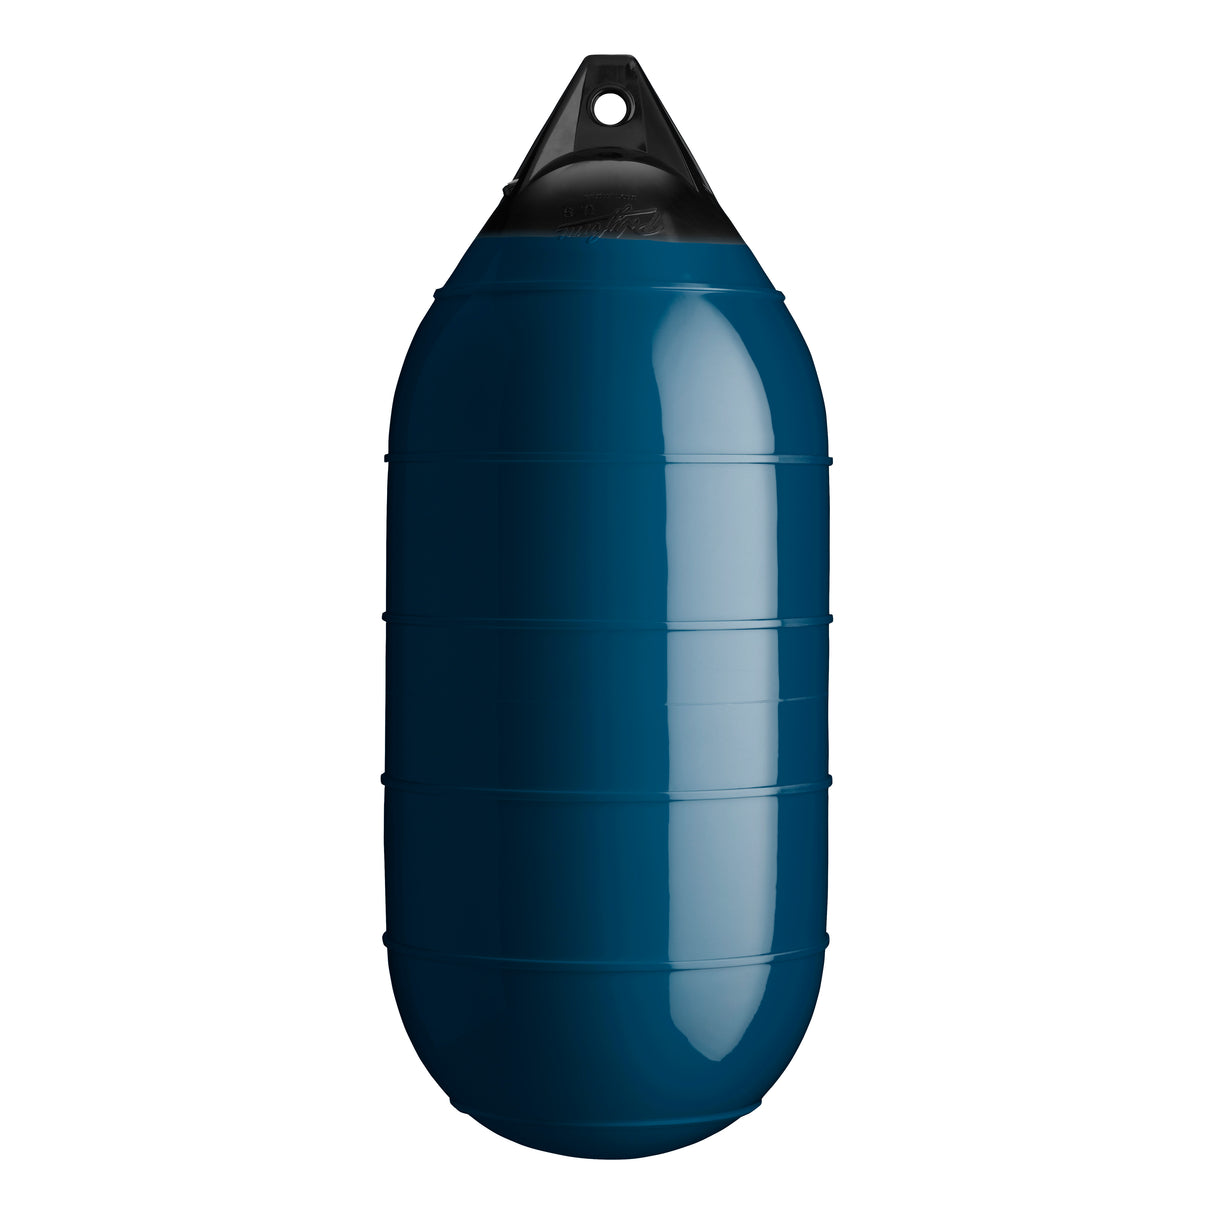 Catalina Blue low drag buoy with Black-Top, Polyform LD-4 